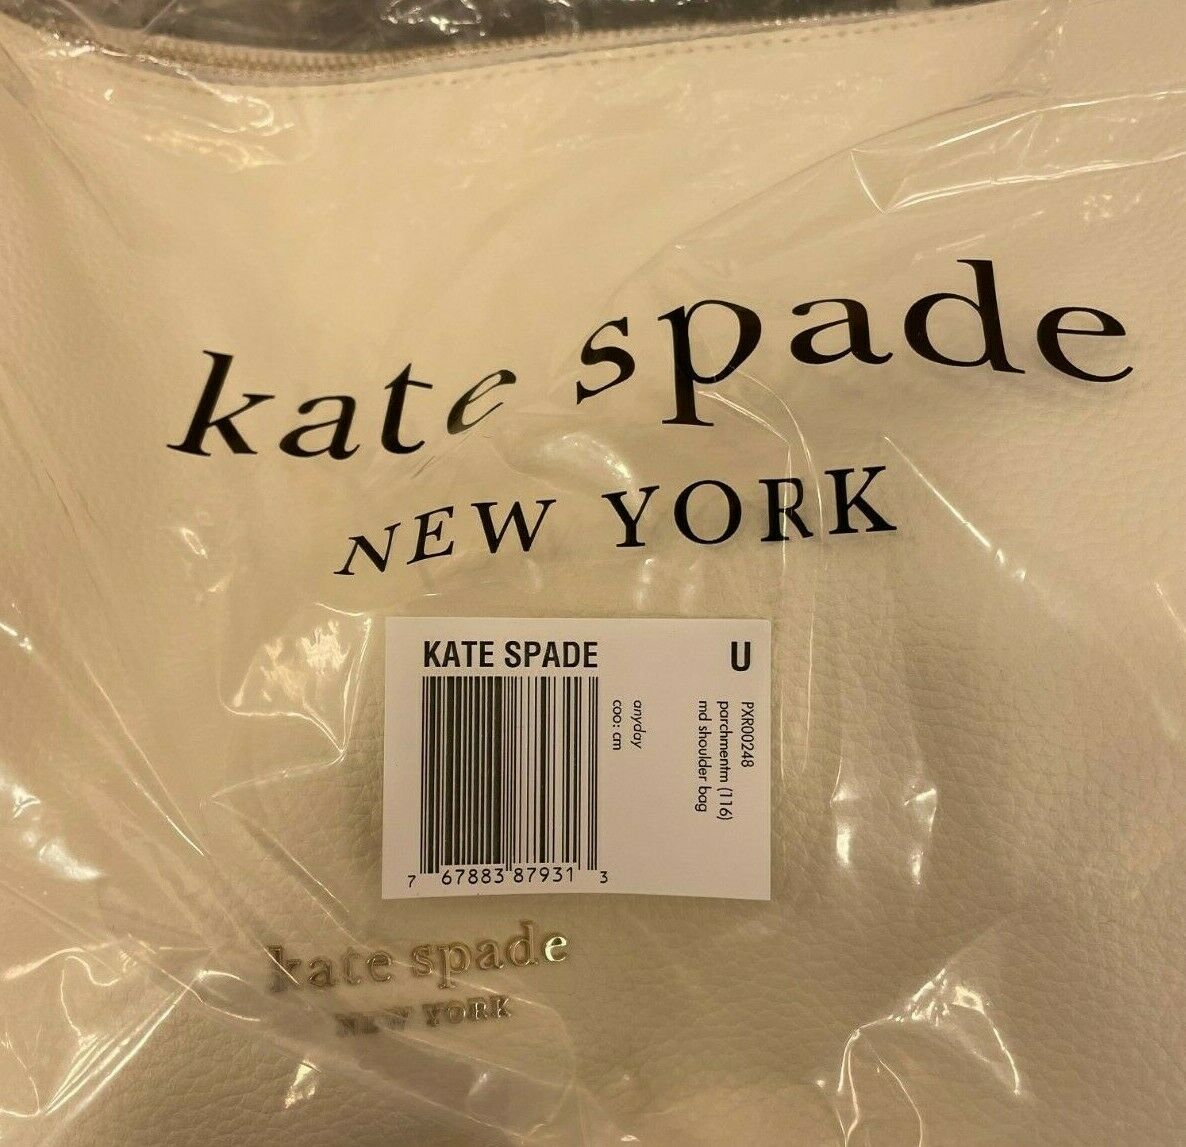 NWT Kate Spade New York Anyday Medium Leather Shoulder Bag in